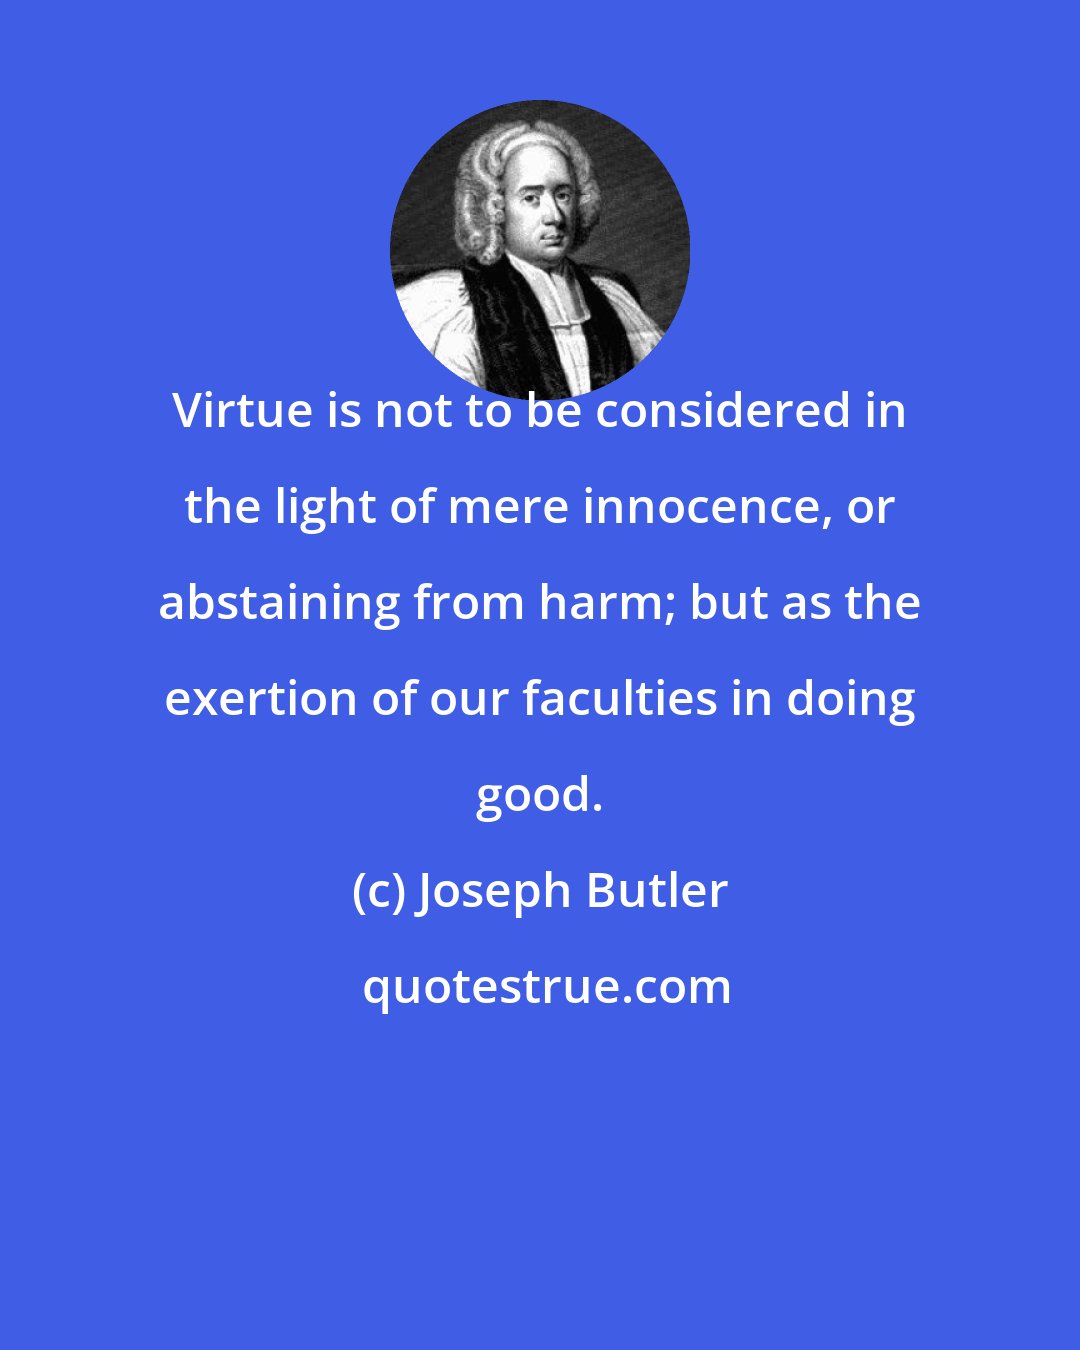 Joseph Butler: Virtue is not to be considered in the light of mere innocence, or abstaining from harm; but as the exertion of our faculties in doing good.